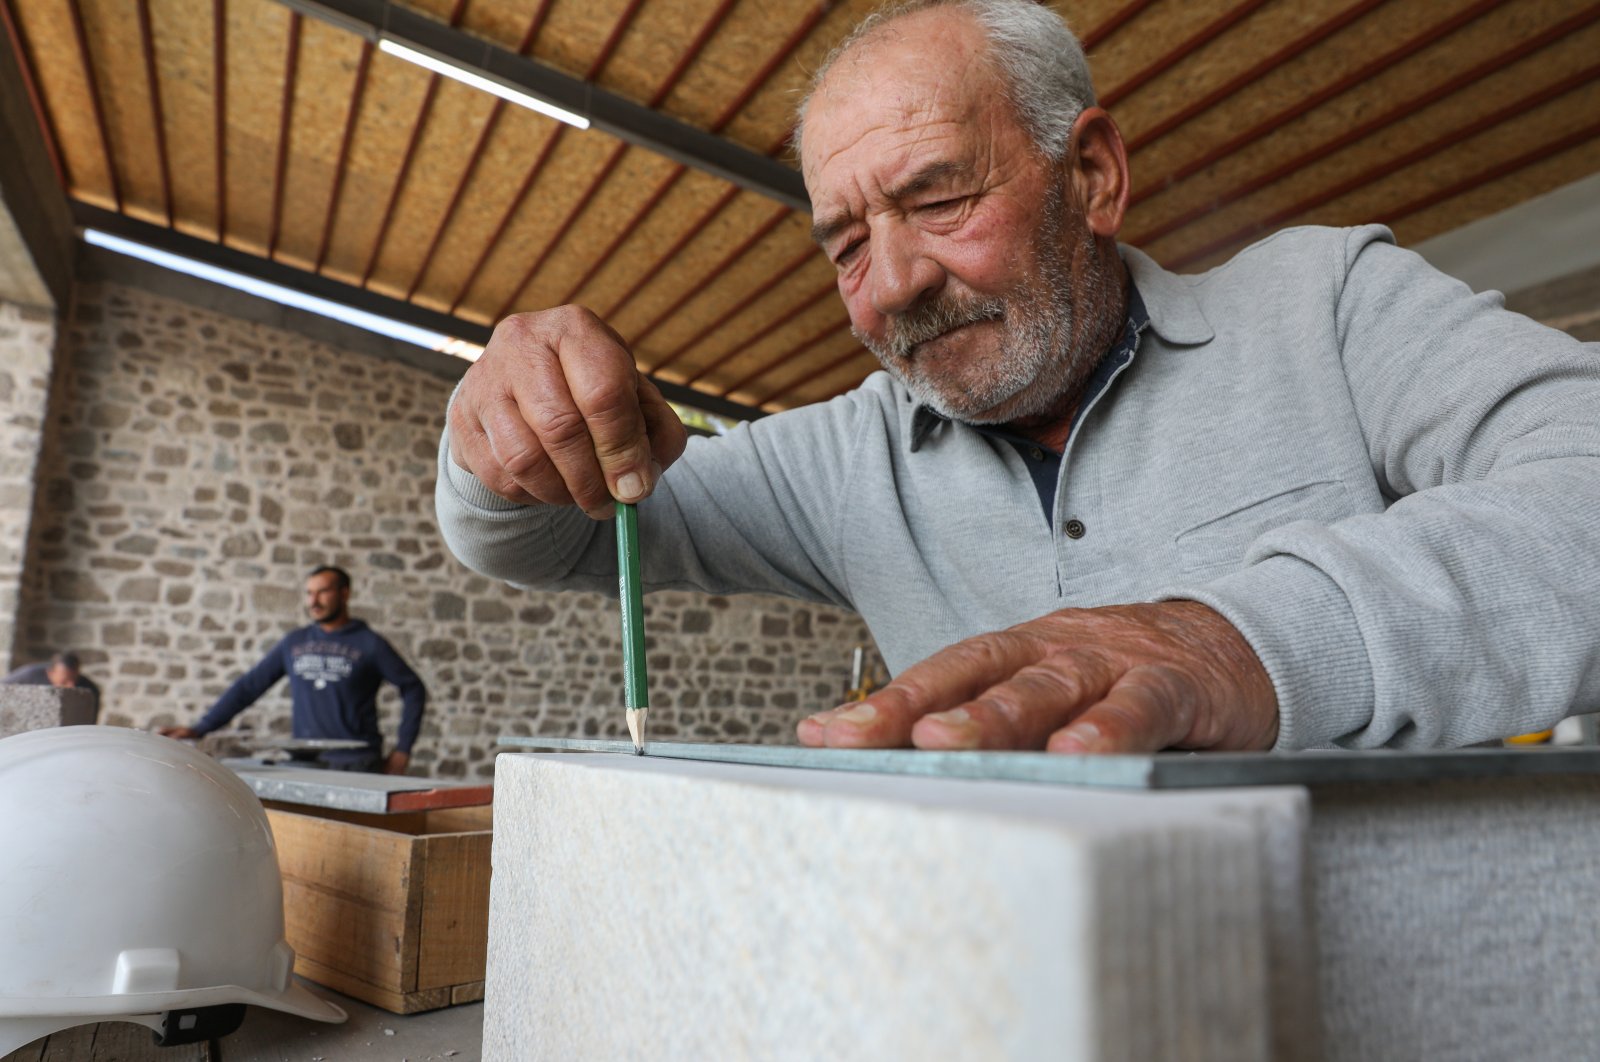 The artifacts unearthed during the excavations carried out in the ancient city of Pergamon are restored by the hands of 61-year-old stonemason Selim Baskın, who strives to protect the magnificence of the region, Izmir, Türkiye, Oct. 12, 2022. (AA Photo)